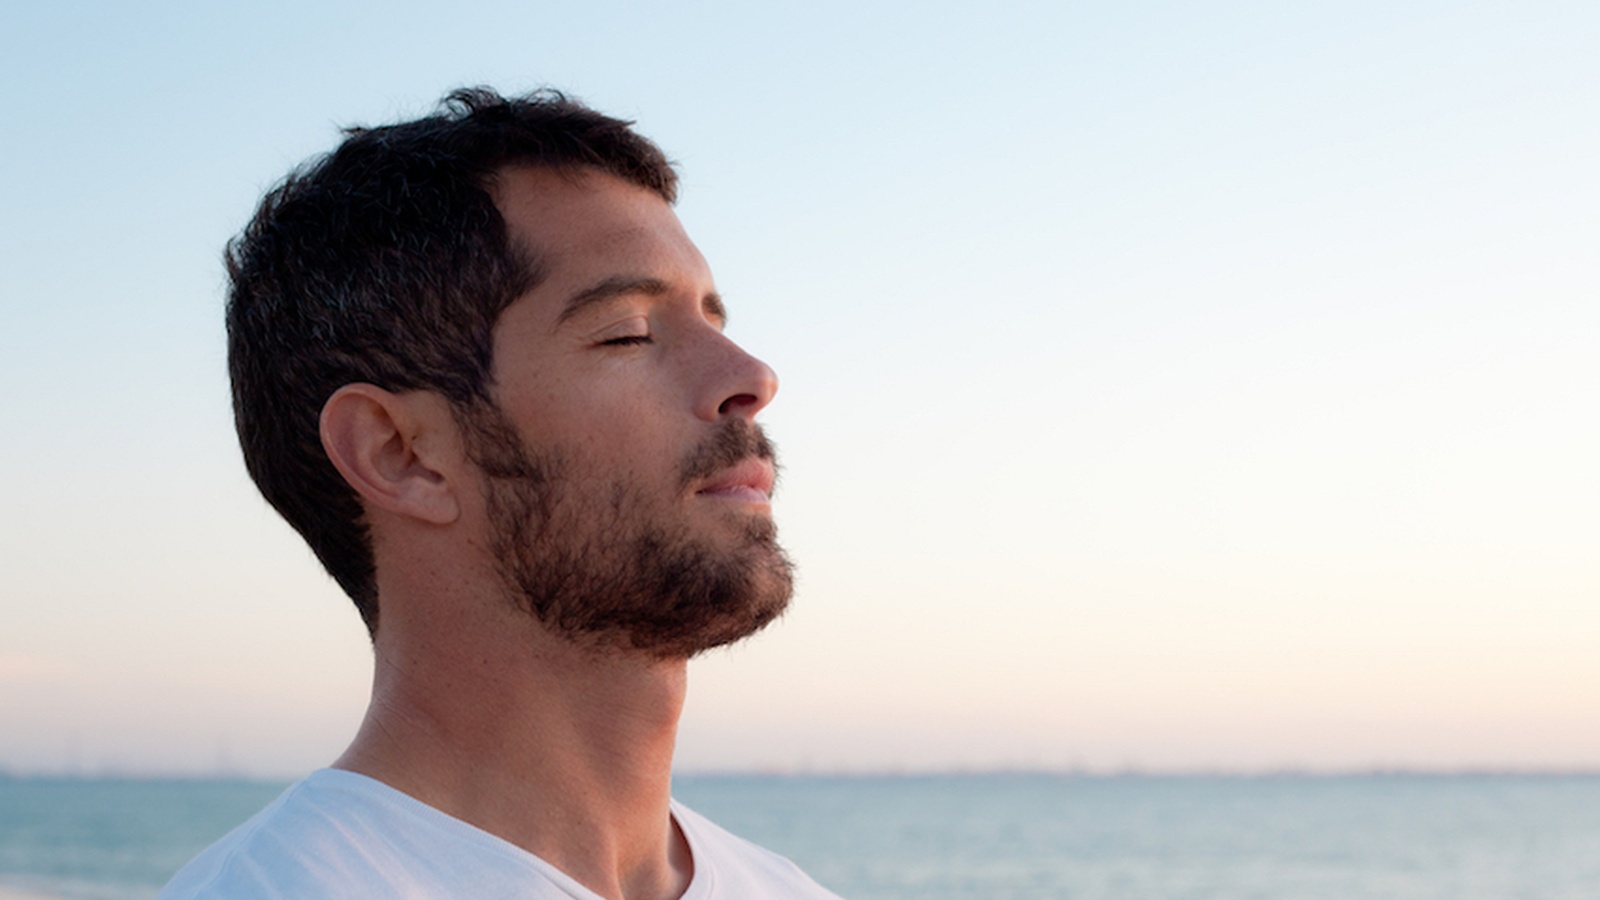 Are You Breathing For Optimal Health?